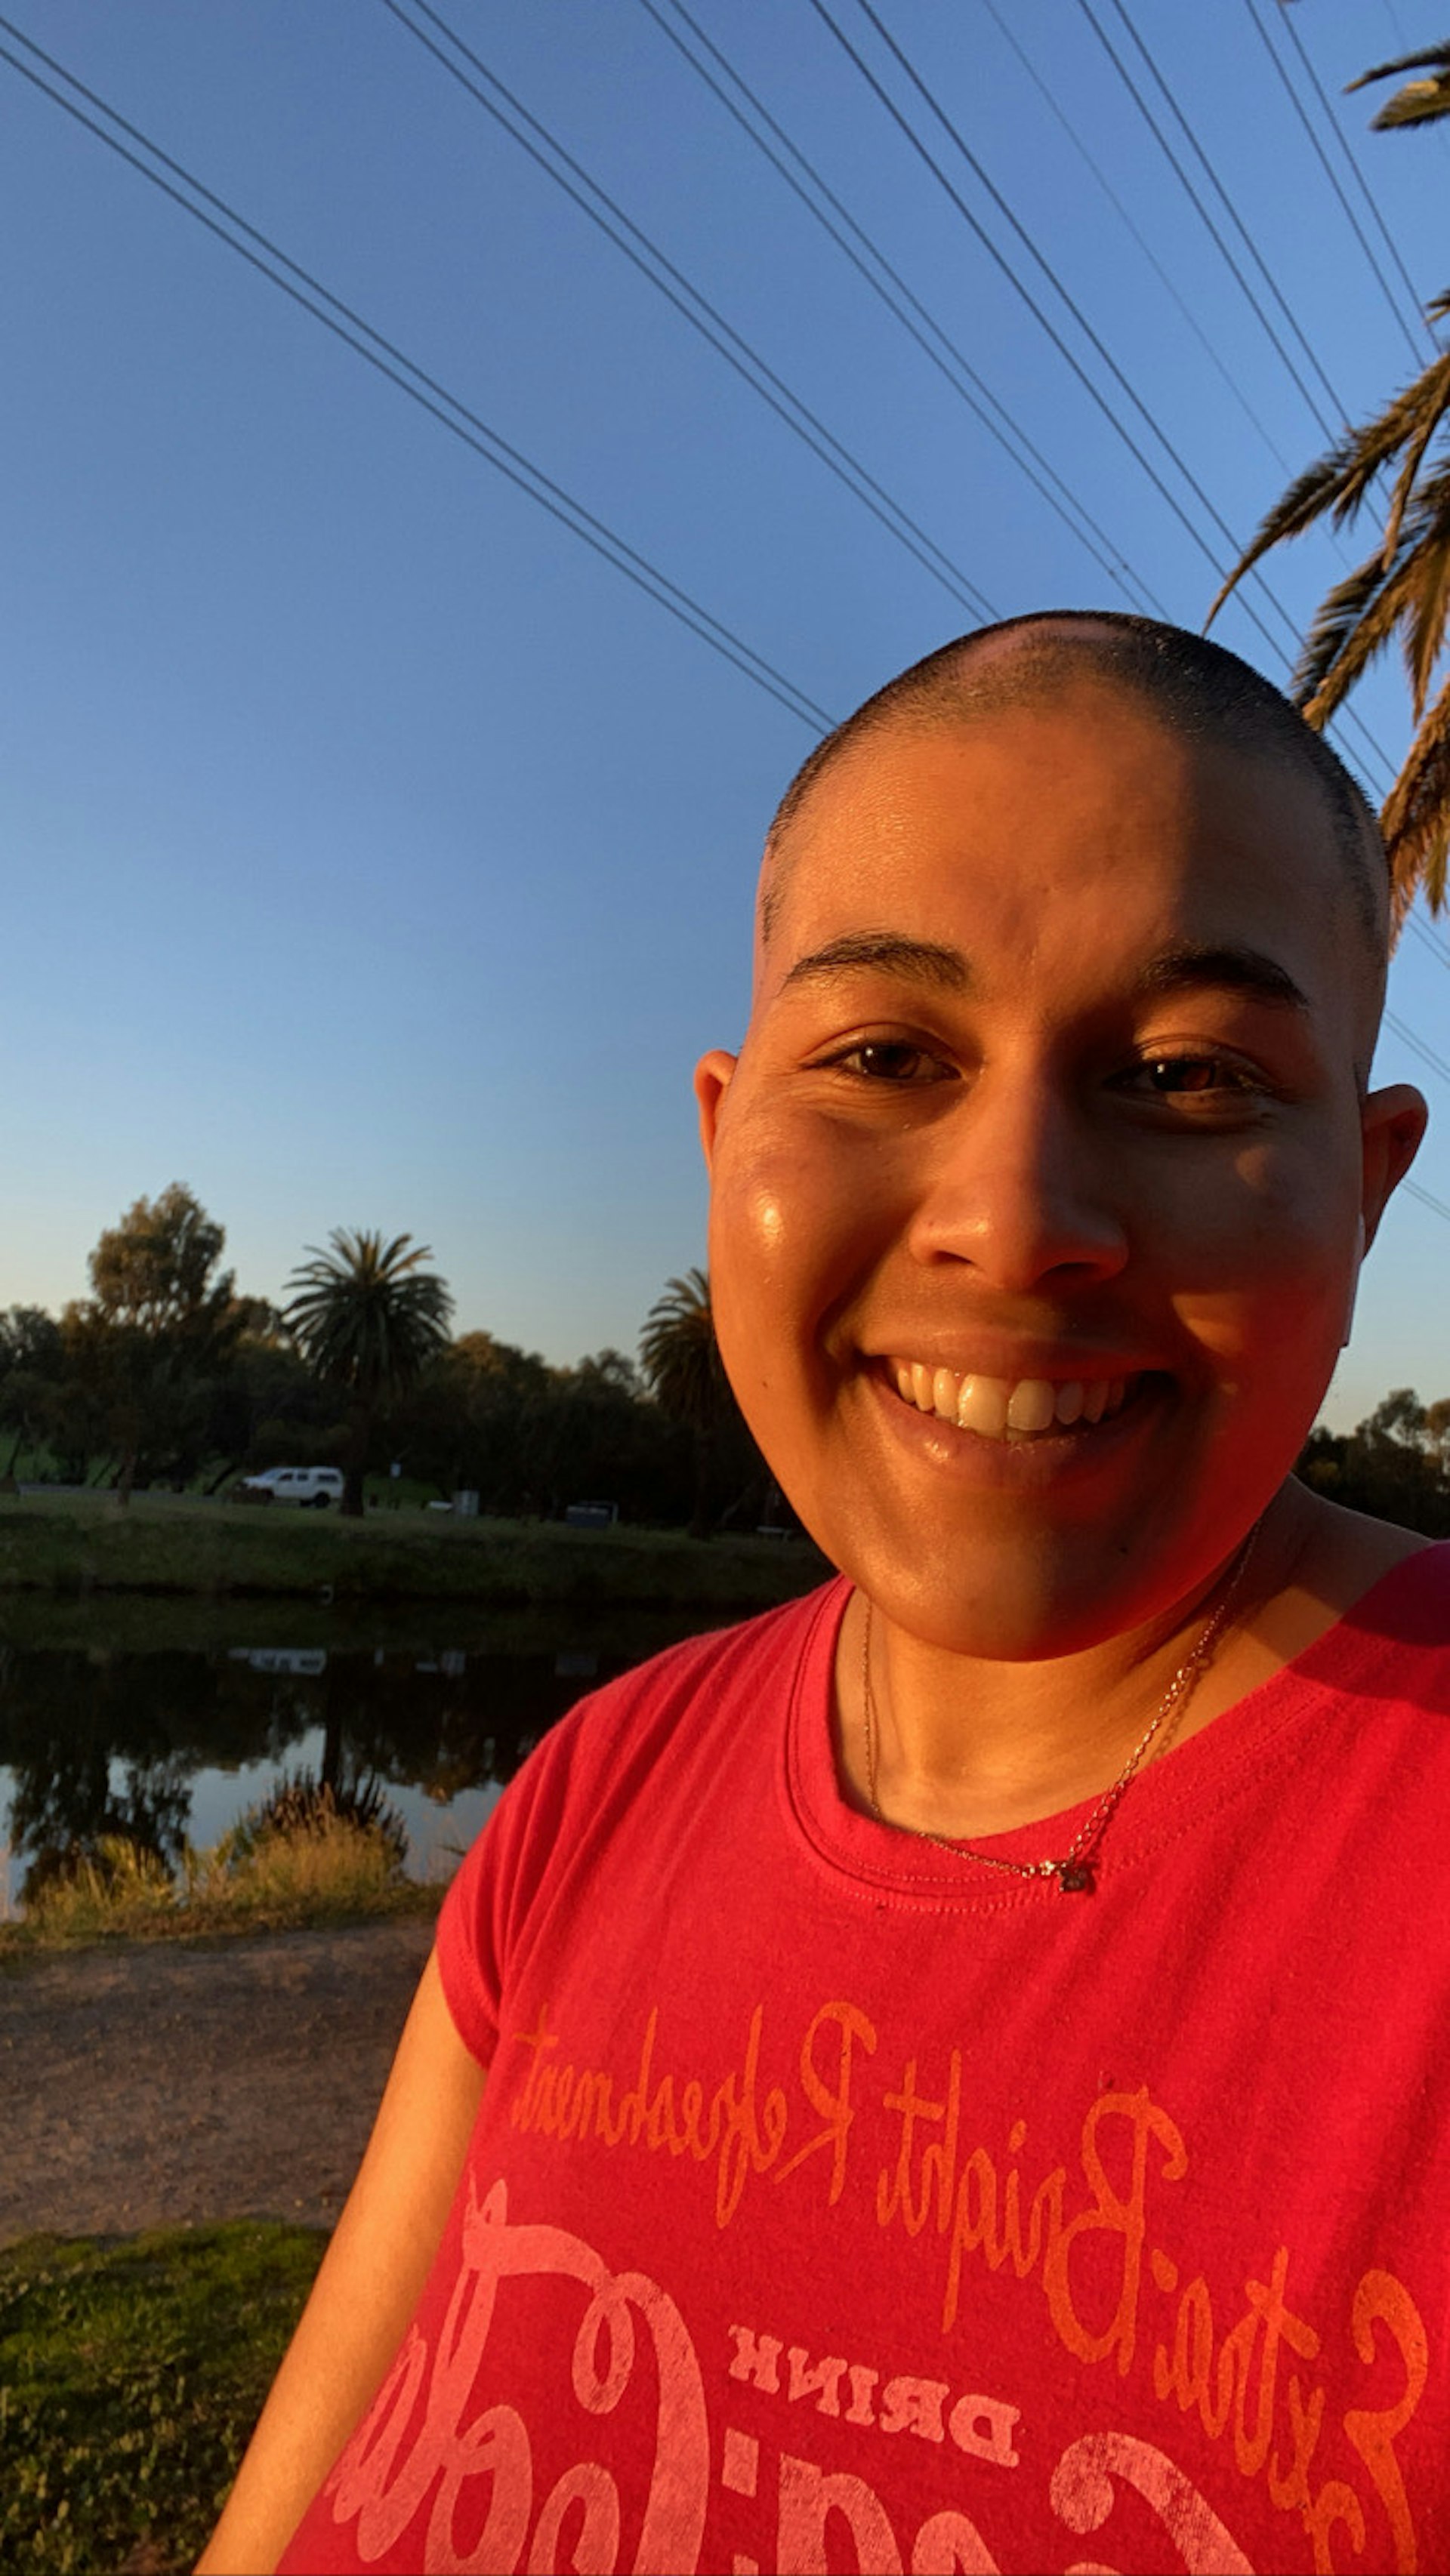 Brooke stands outside in front of a clear blue sky, smiling and looking into the camera. She wears a red t-shirt and has short dark hair, and has golden hour sunlight on her face.